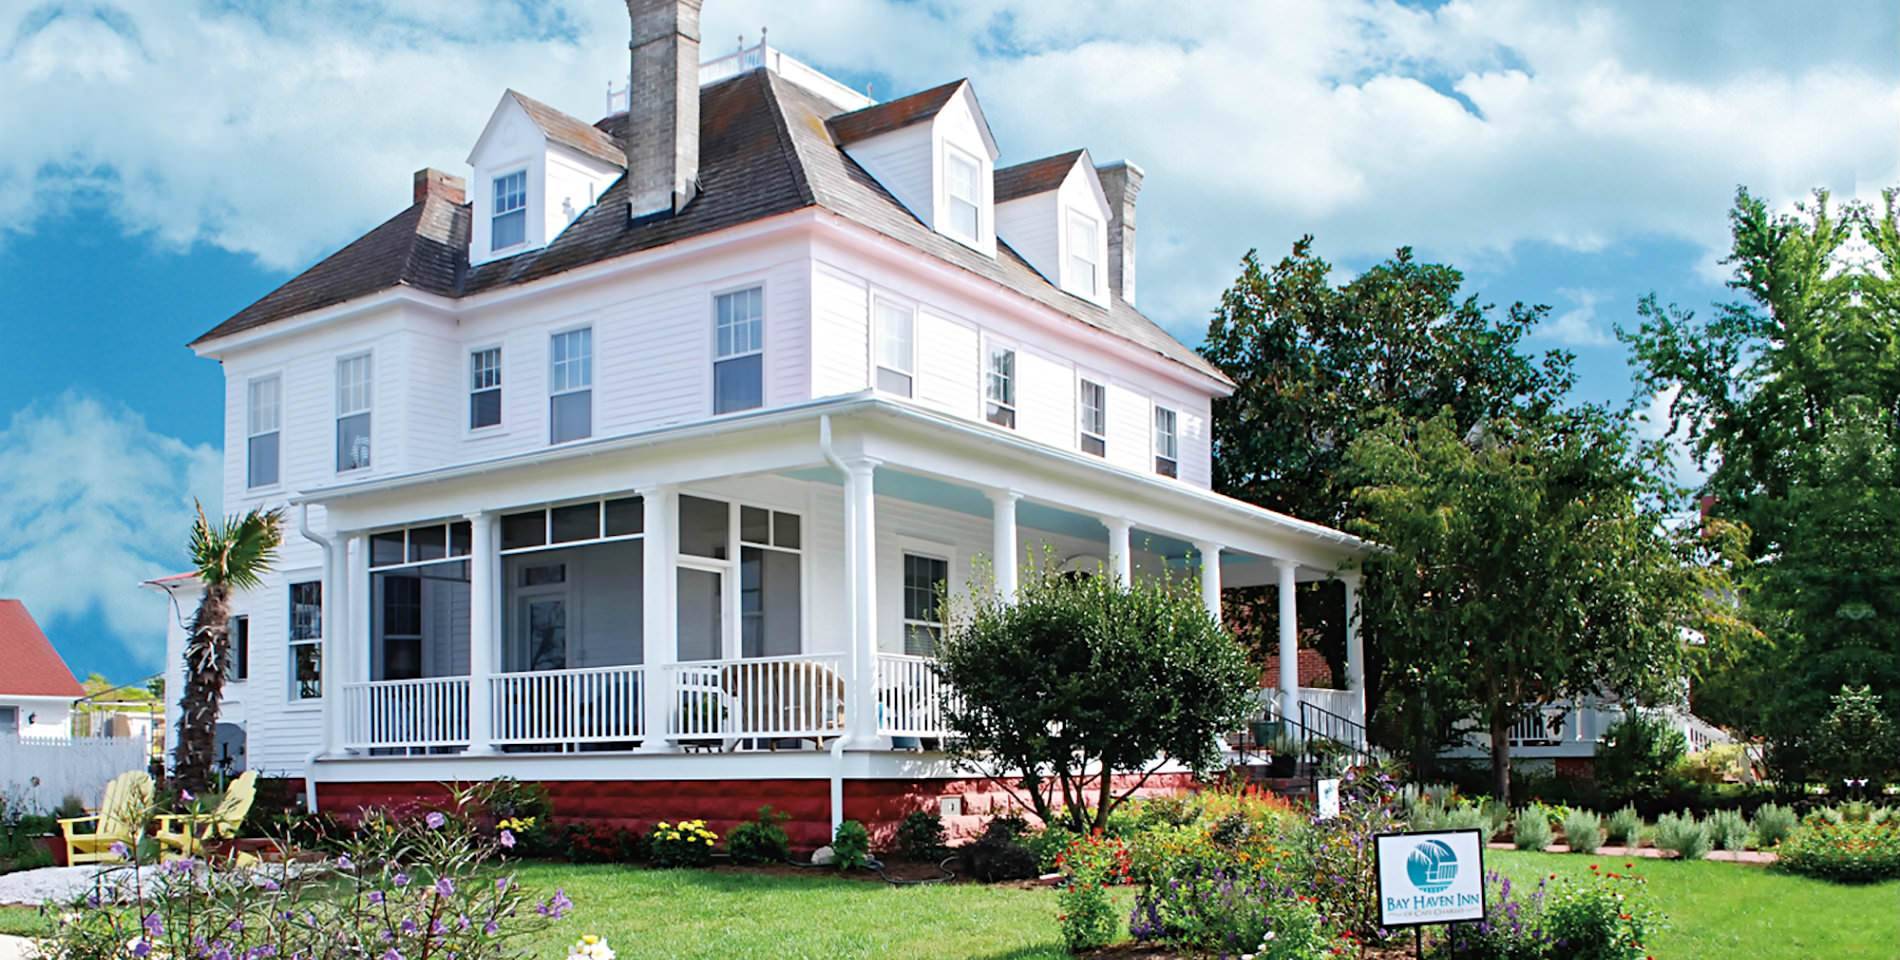 The stately Colonial-Revival style Inn with white siding and wraparound front porch. 